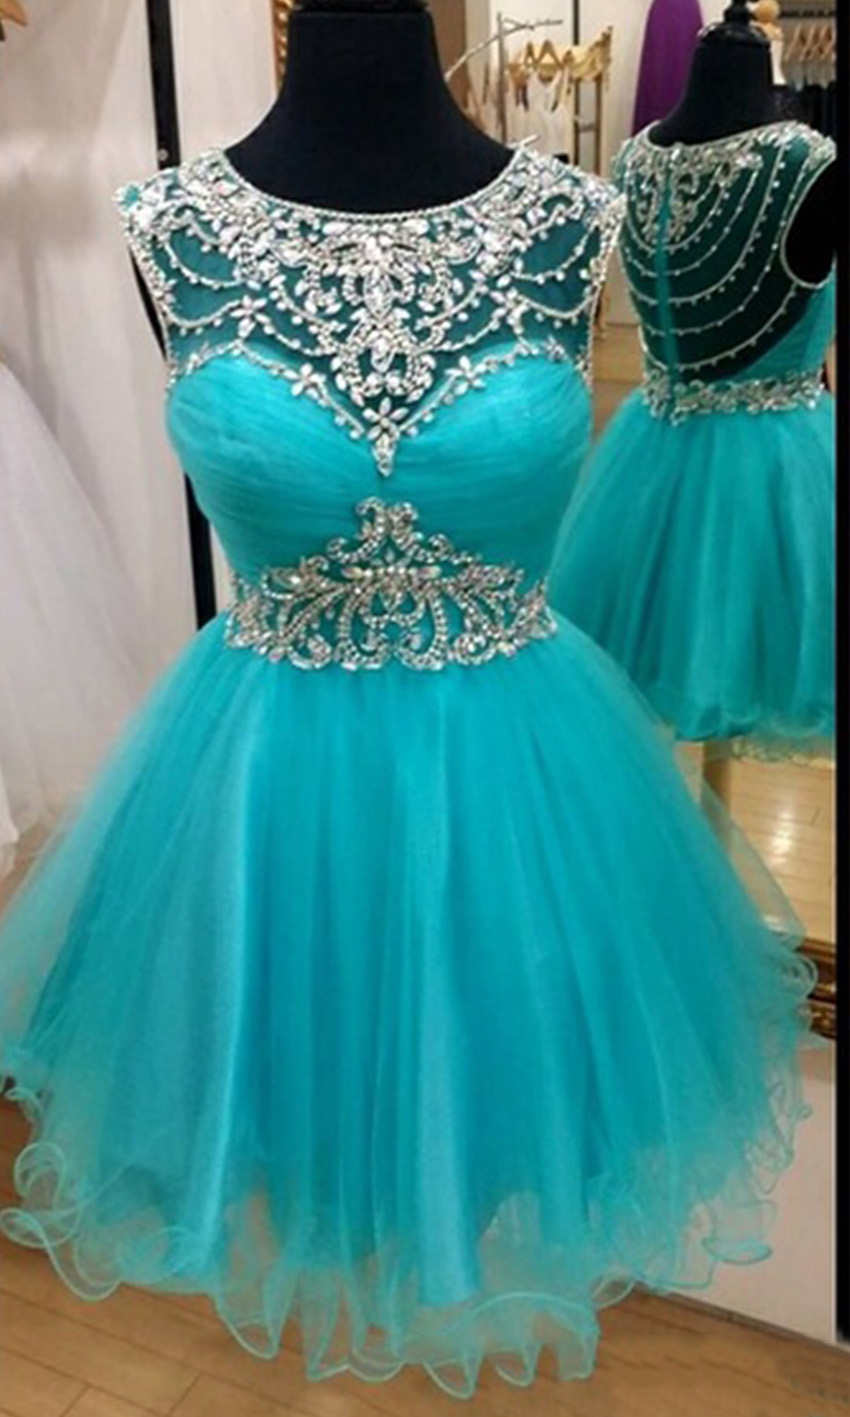 Short Extravagant Prom Dresses with Patterned Rhinestones And Sheer Back P536